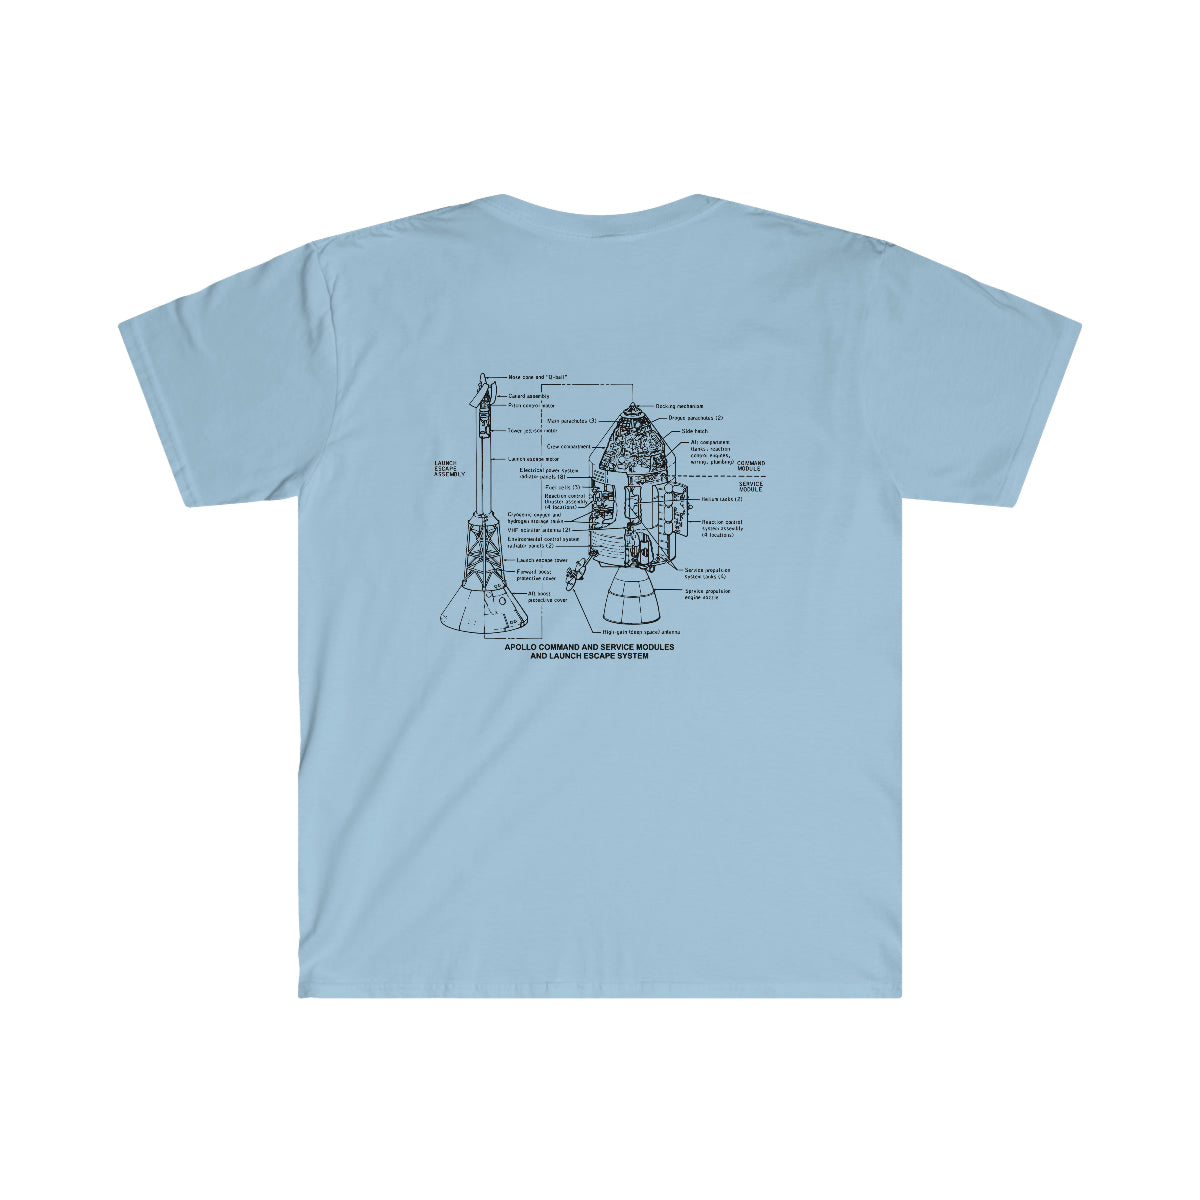 This Apollo Command & Service Module T-Shirt features a historic design inspired by the Apollo space program.